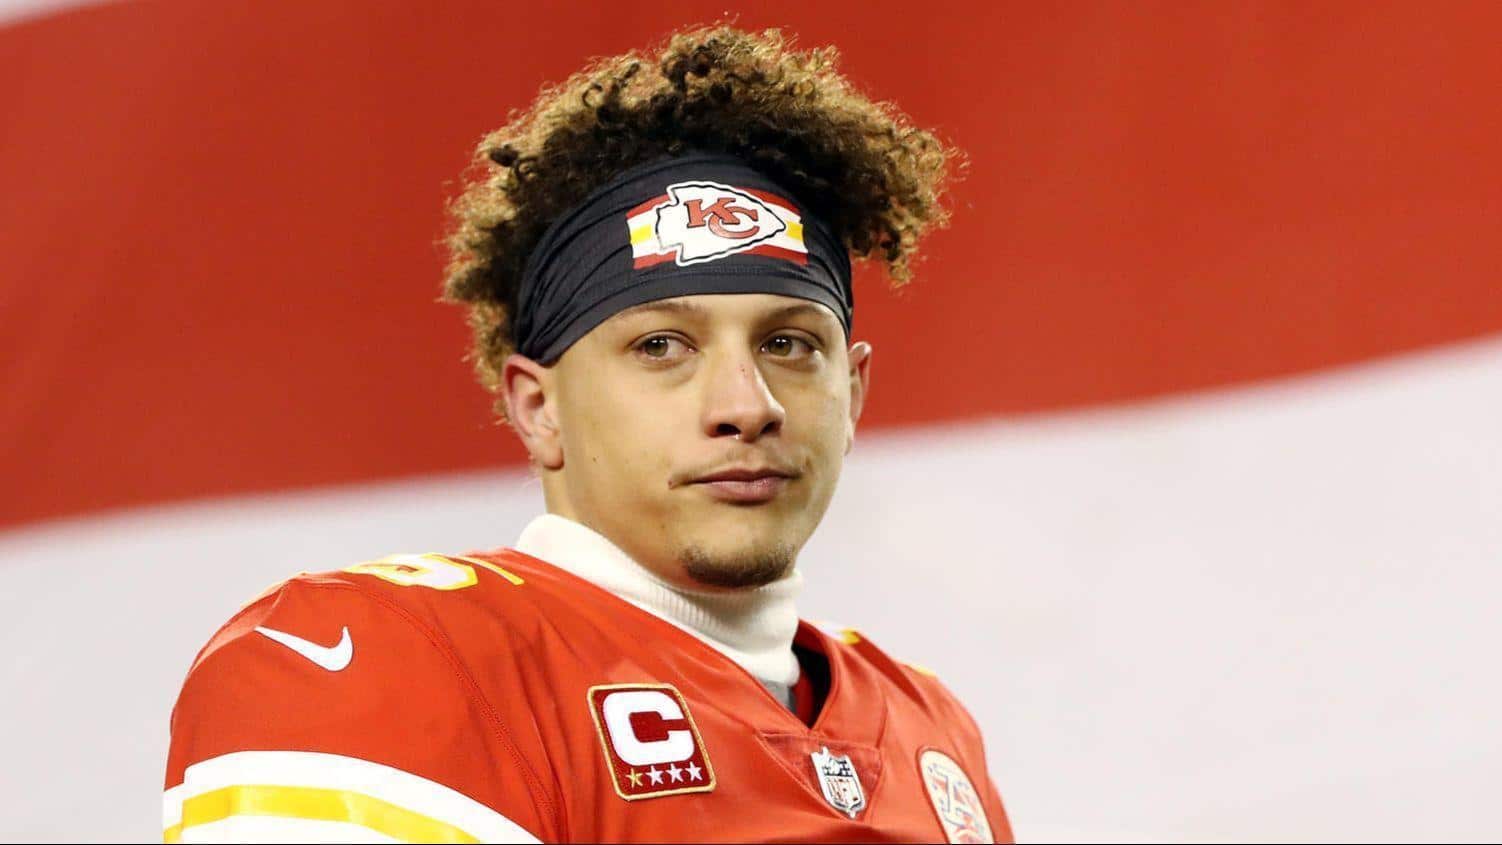 Patrick Mahomes Will Be On The Cover Of Madden 20